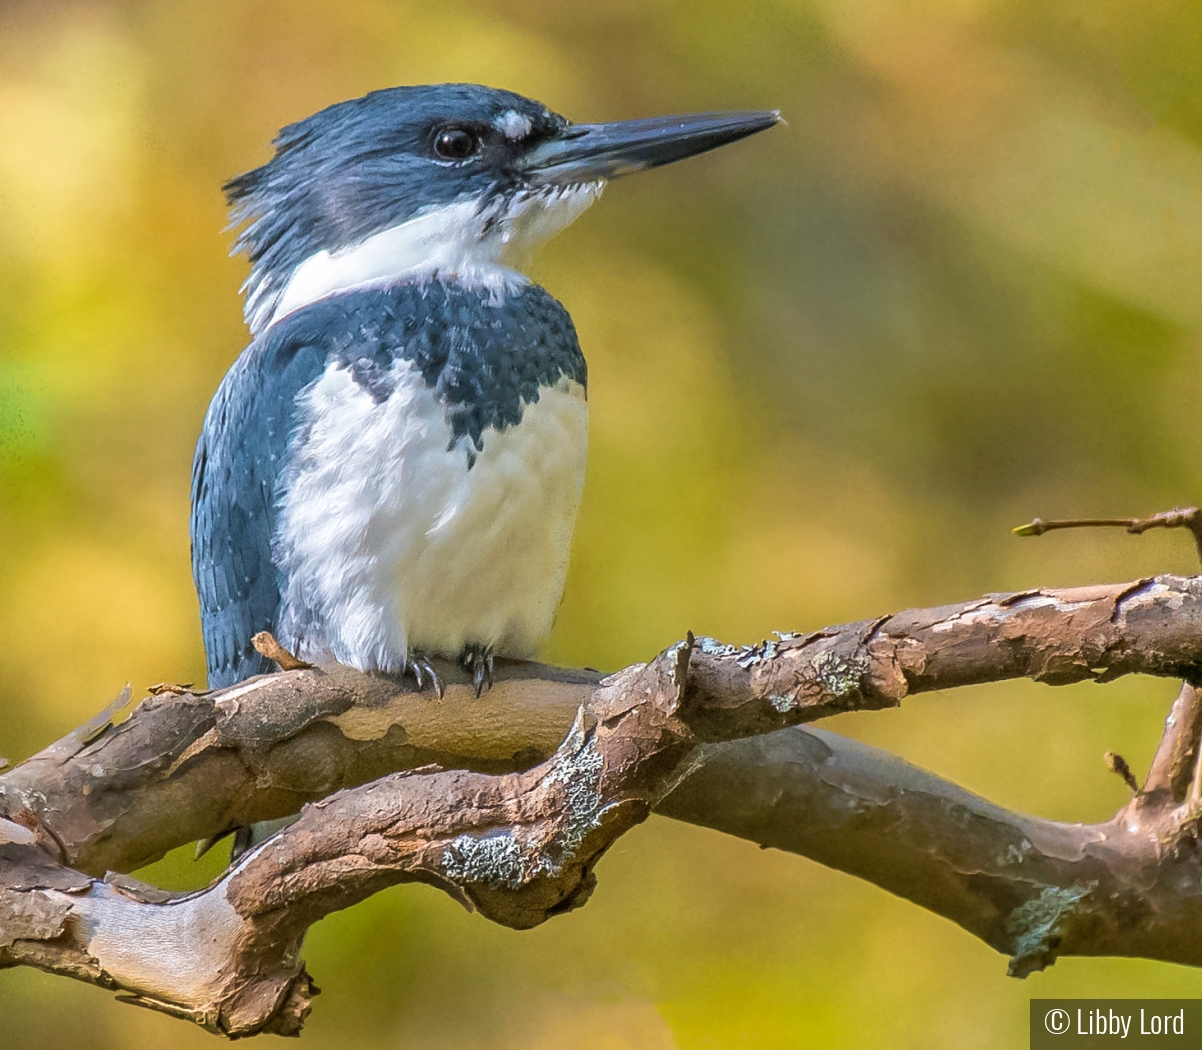 Splendid Belted Kingfisher by Libby Lord